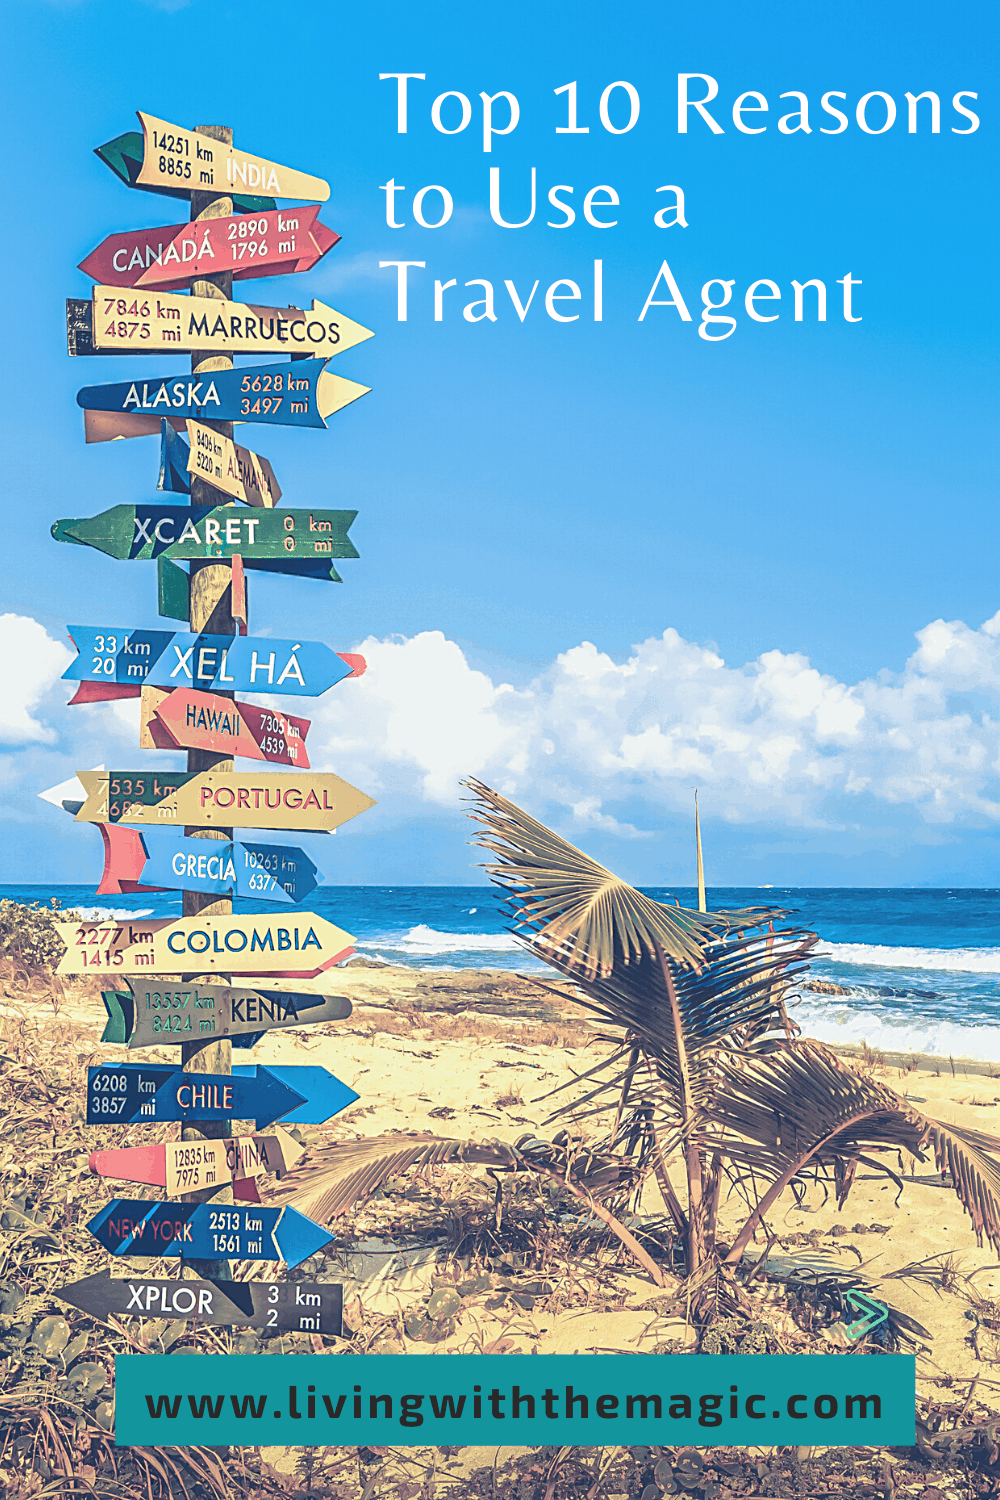 meaning of travel agent